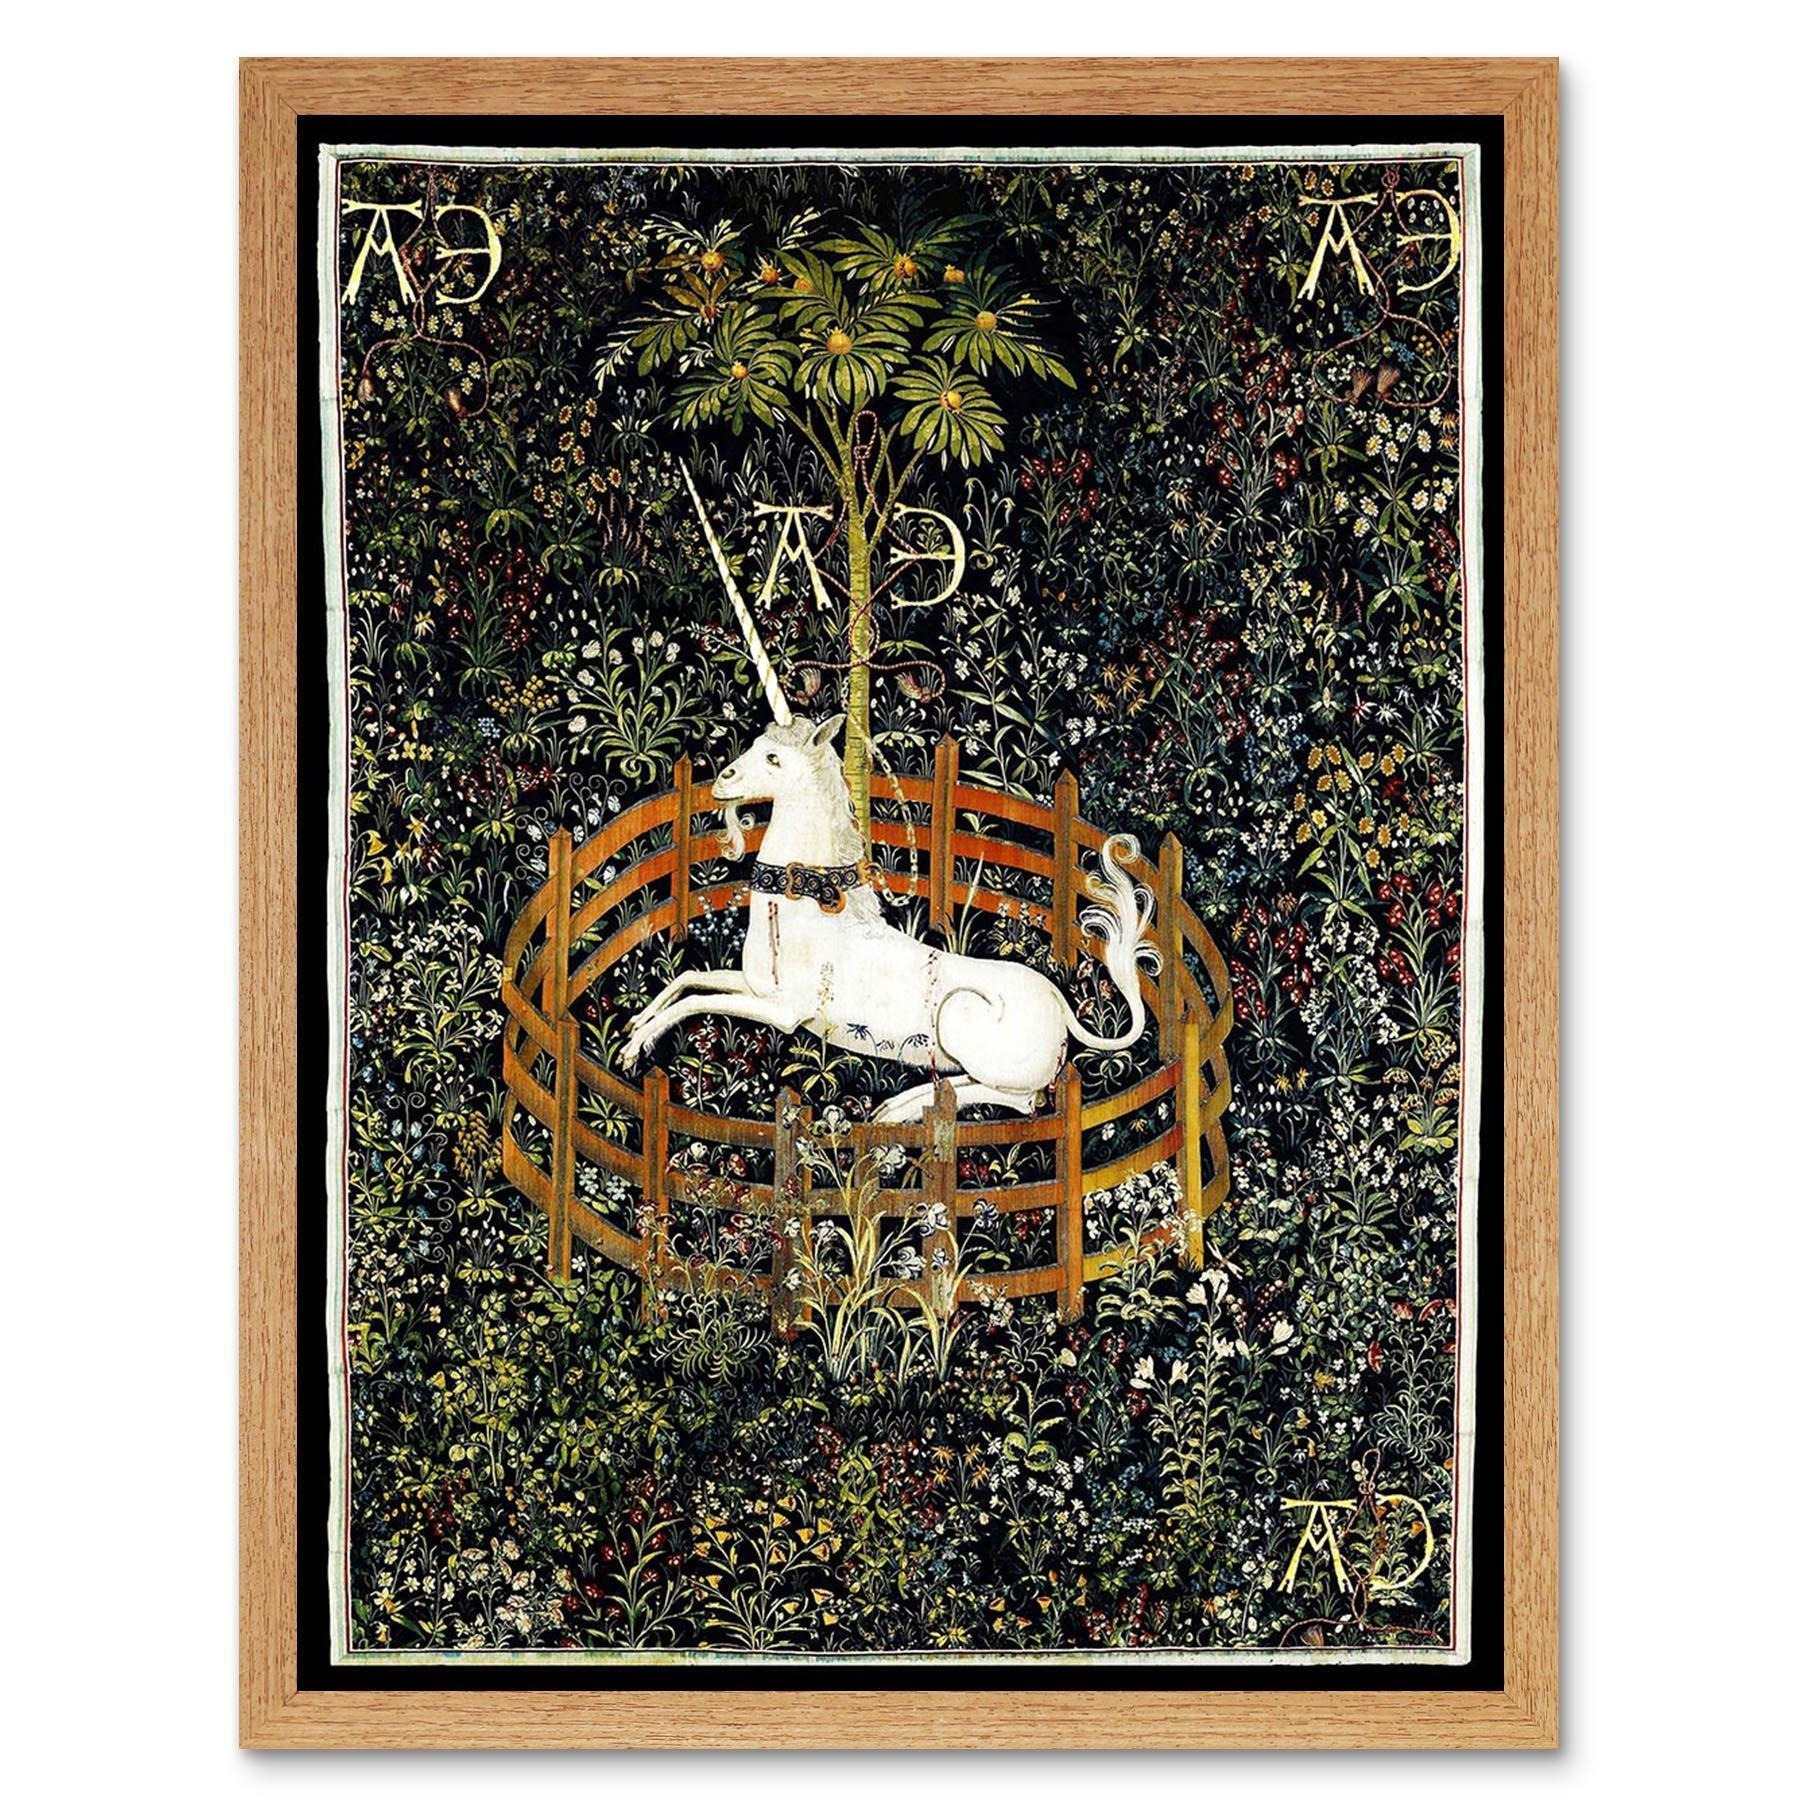 Unicorn Rests in a Garden Medieval Mythical Animal Nature Art Middle Ages Tapestry Art Print Framed Poster Wall Decor 12x16 inch - image 1